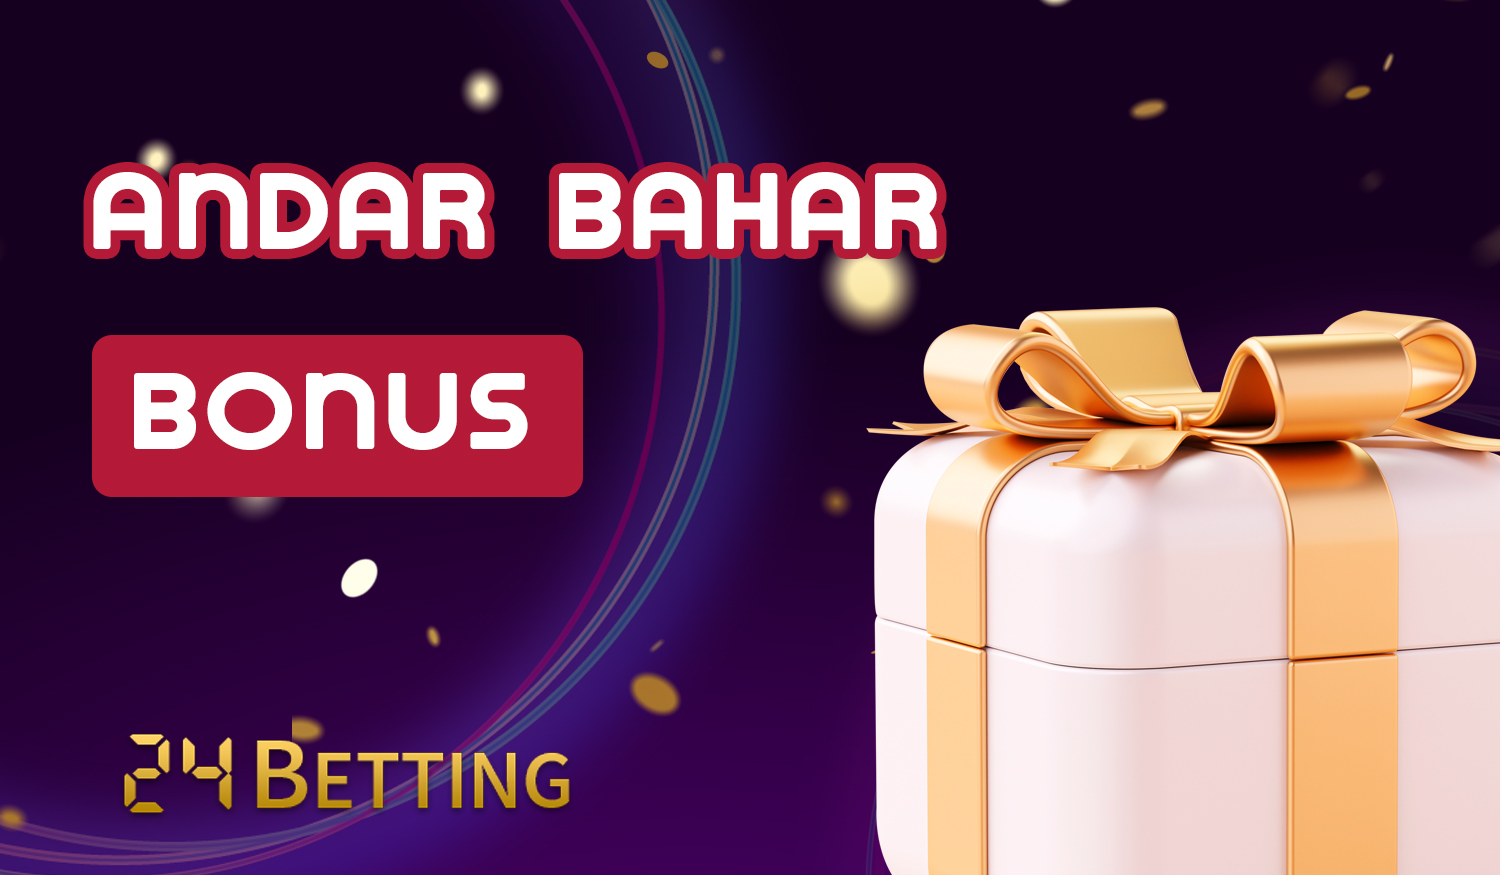 What bonuses 24betting offers to Andar bahar fans from India